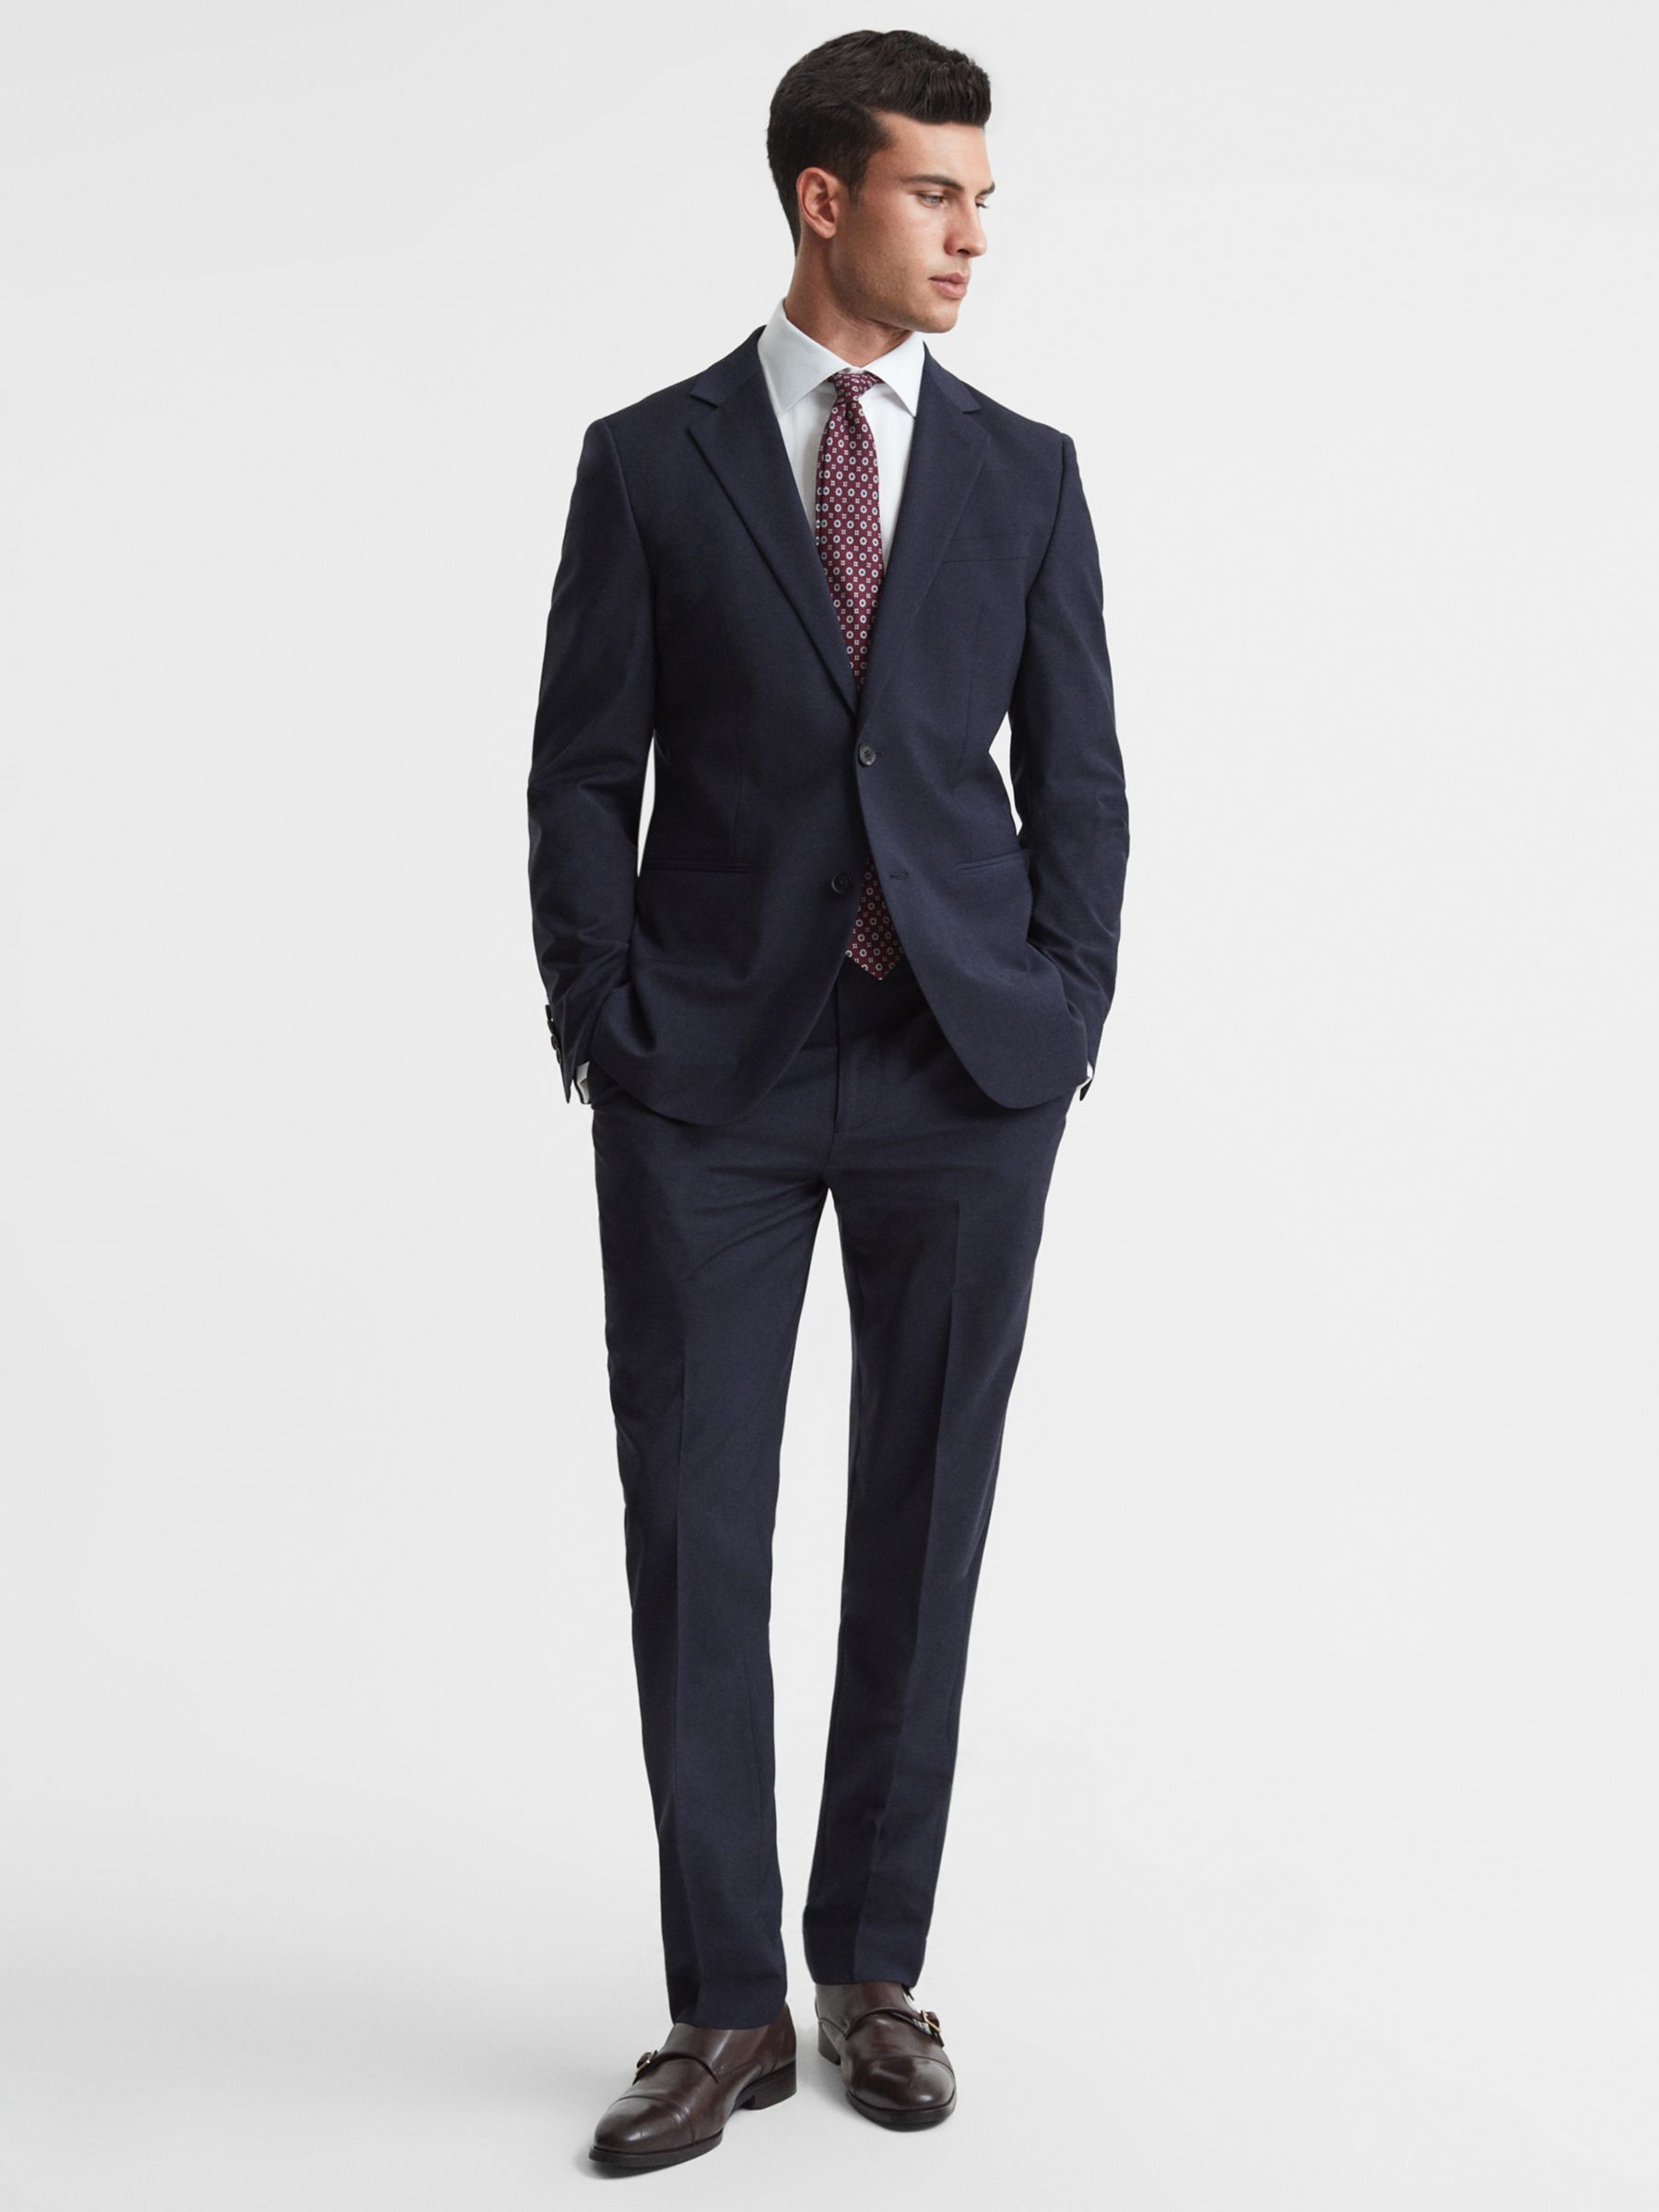 Reiss Hope Wool Blend Tailored Fit Suit Jacket, Navy, 34R